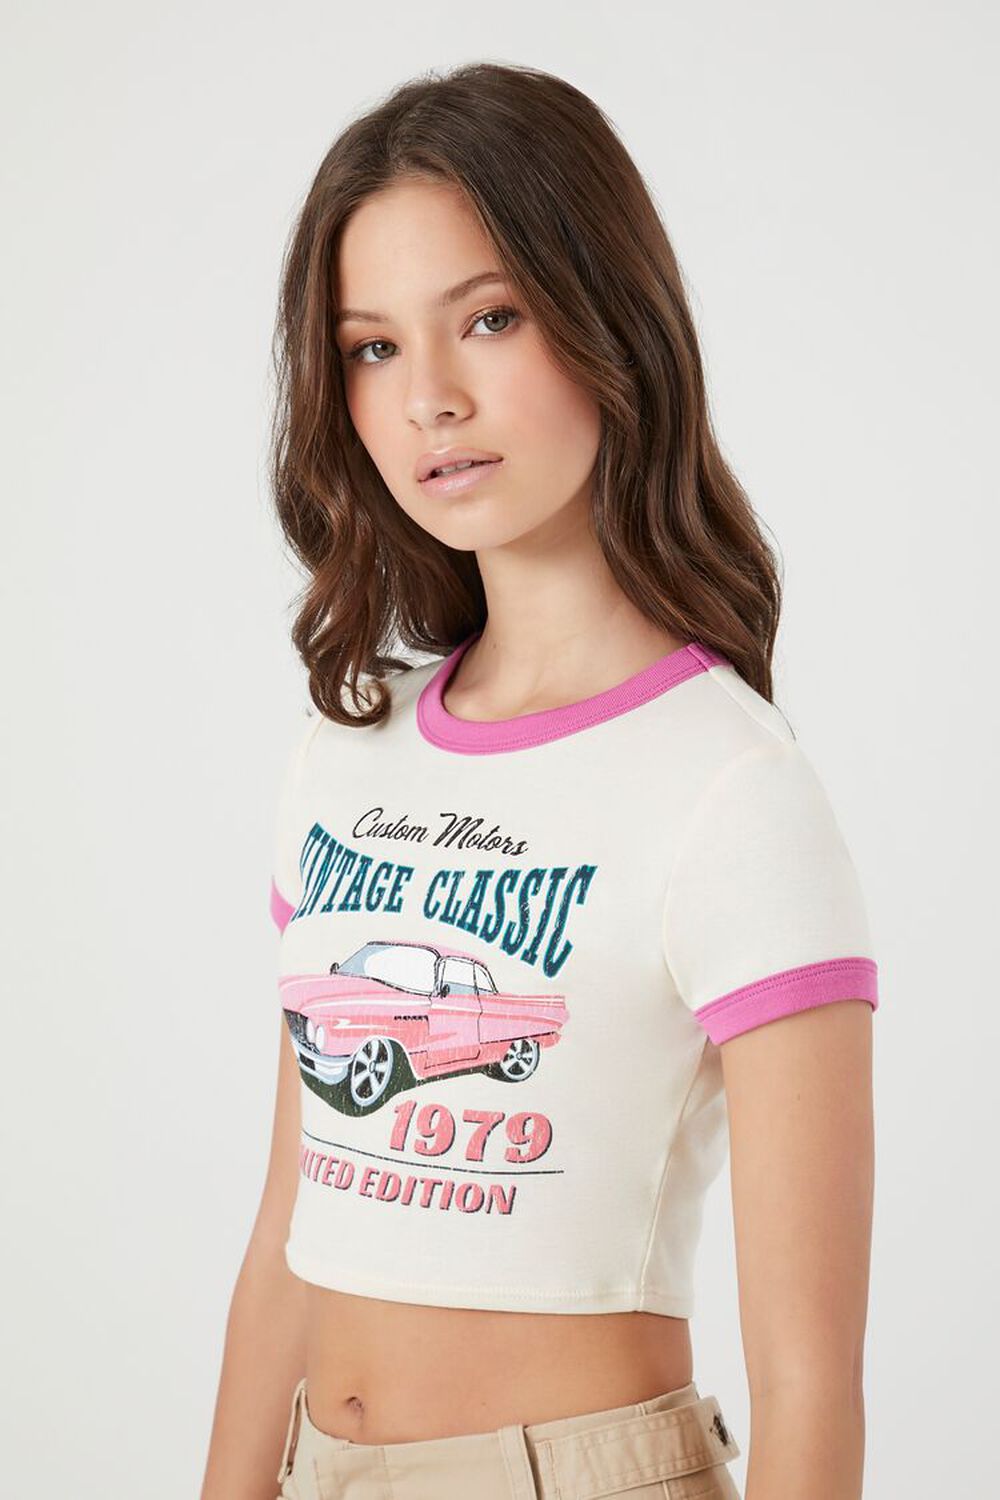 Vintage Classic Ringer Baby Tee